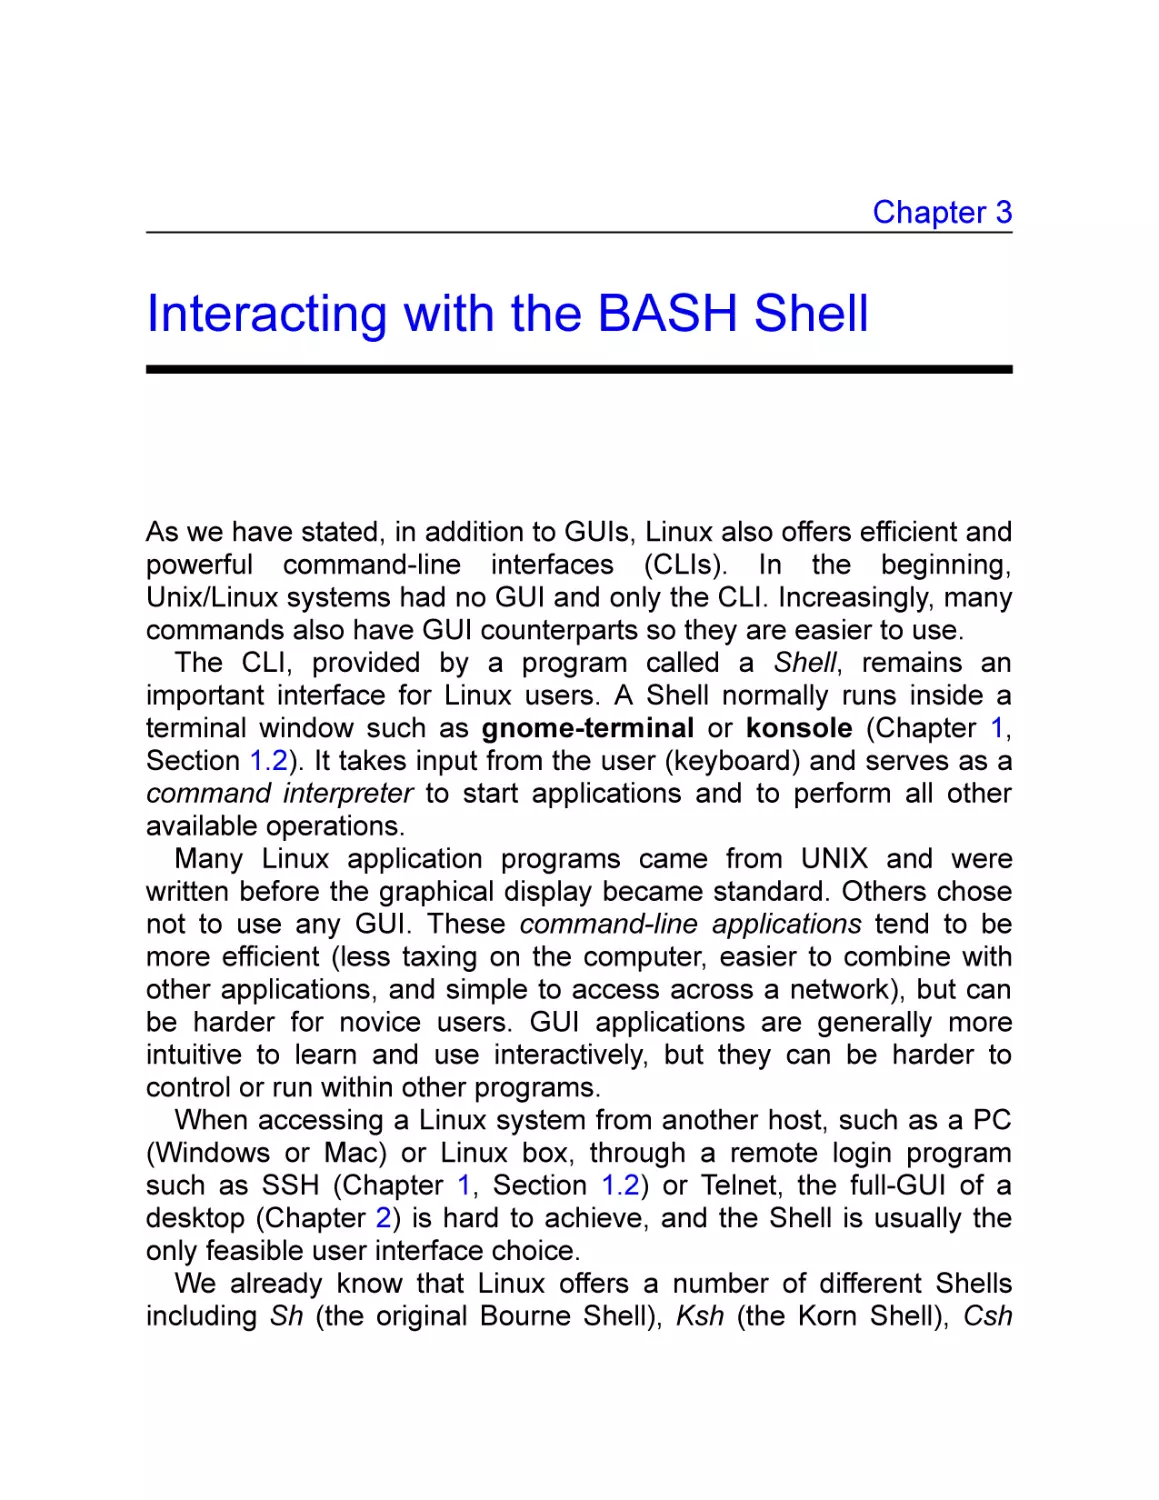 3 Interacting with the BASH Shell